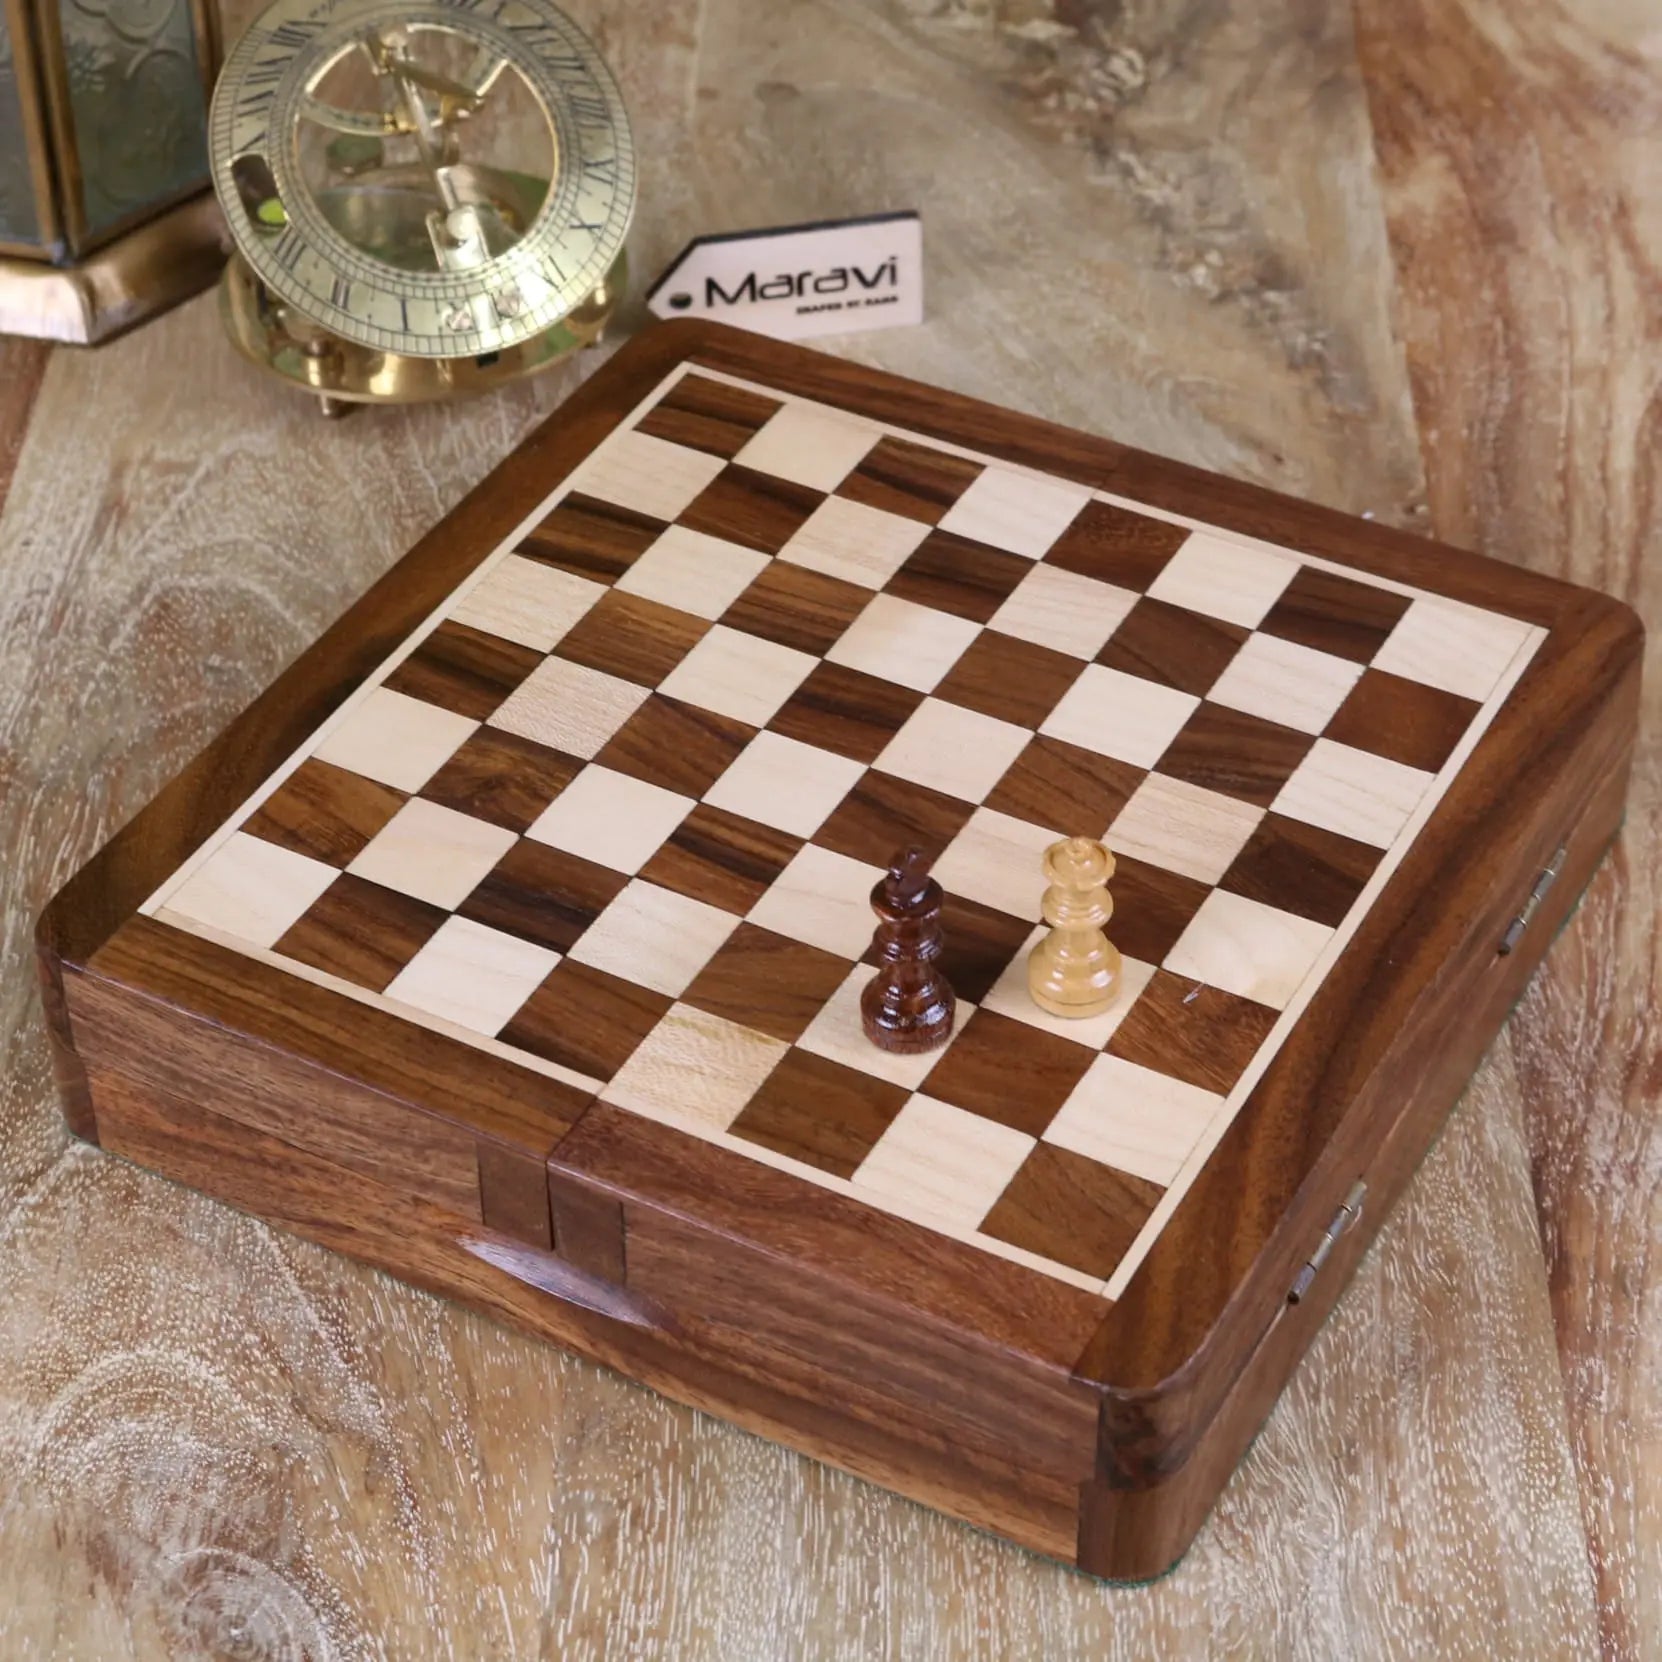 Shatranj Wooden Chess Set 18cm - Top View with King and Queen